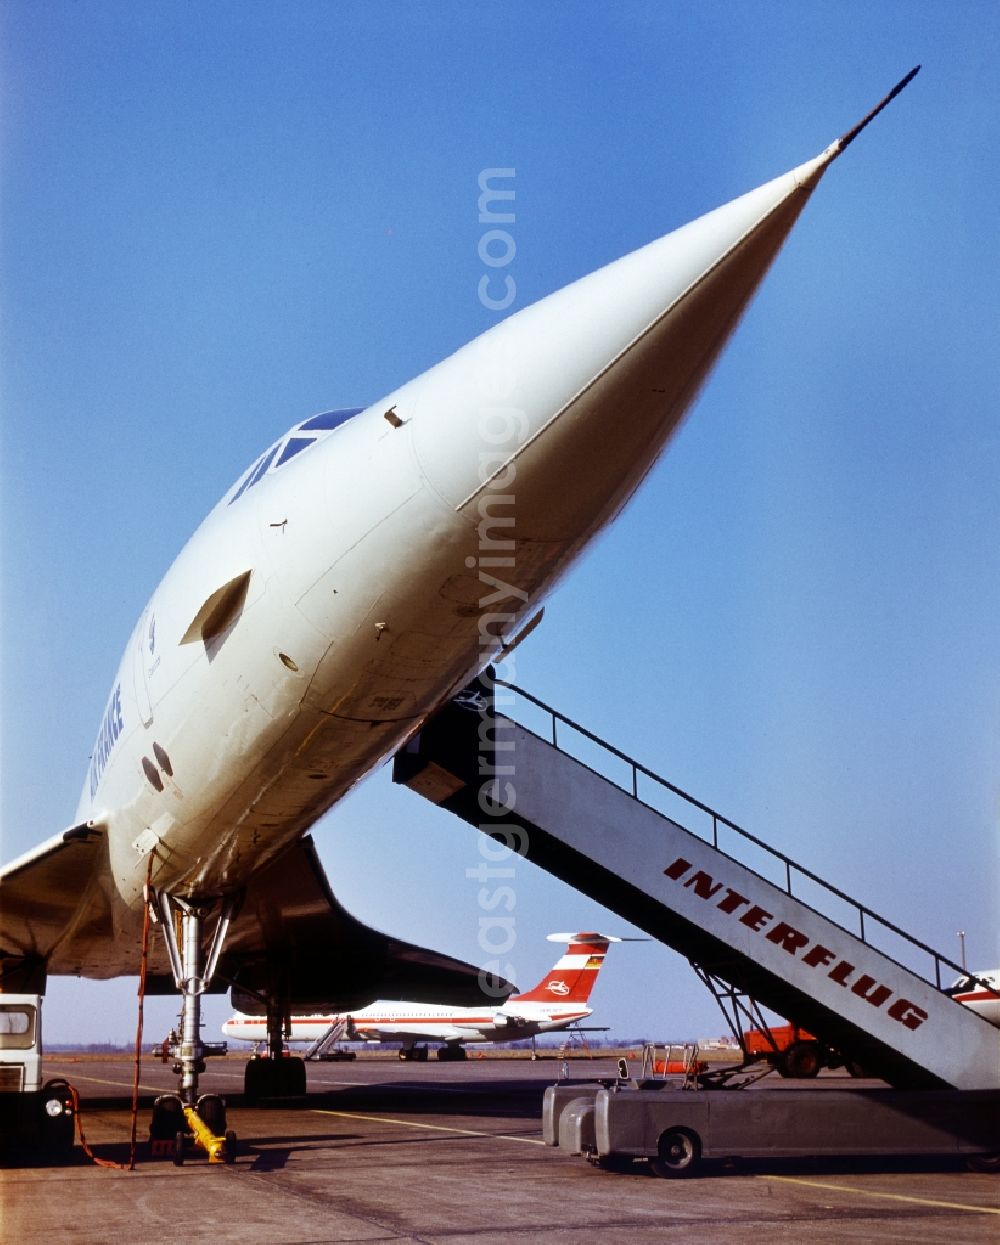 GDR photo archive: Schkeuditz - Air France Concorde F-BVFF on the apron of Leipzig-Schkeuditz Airport in the state Saxony on the territory of the former GDR, German Democratic Republic